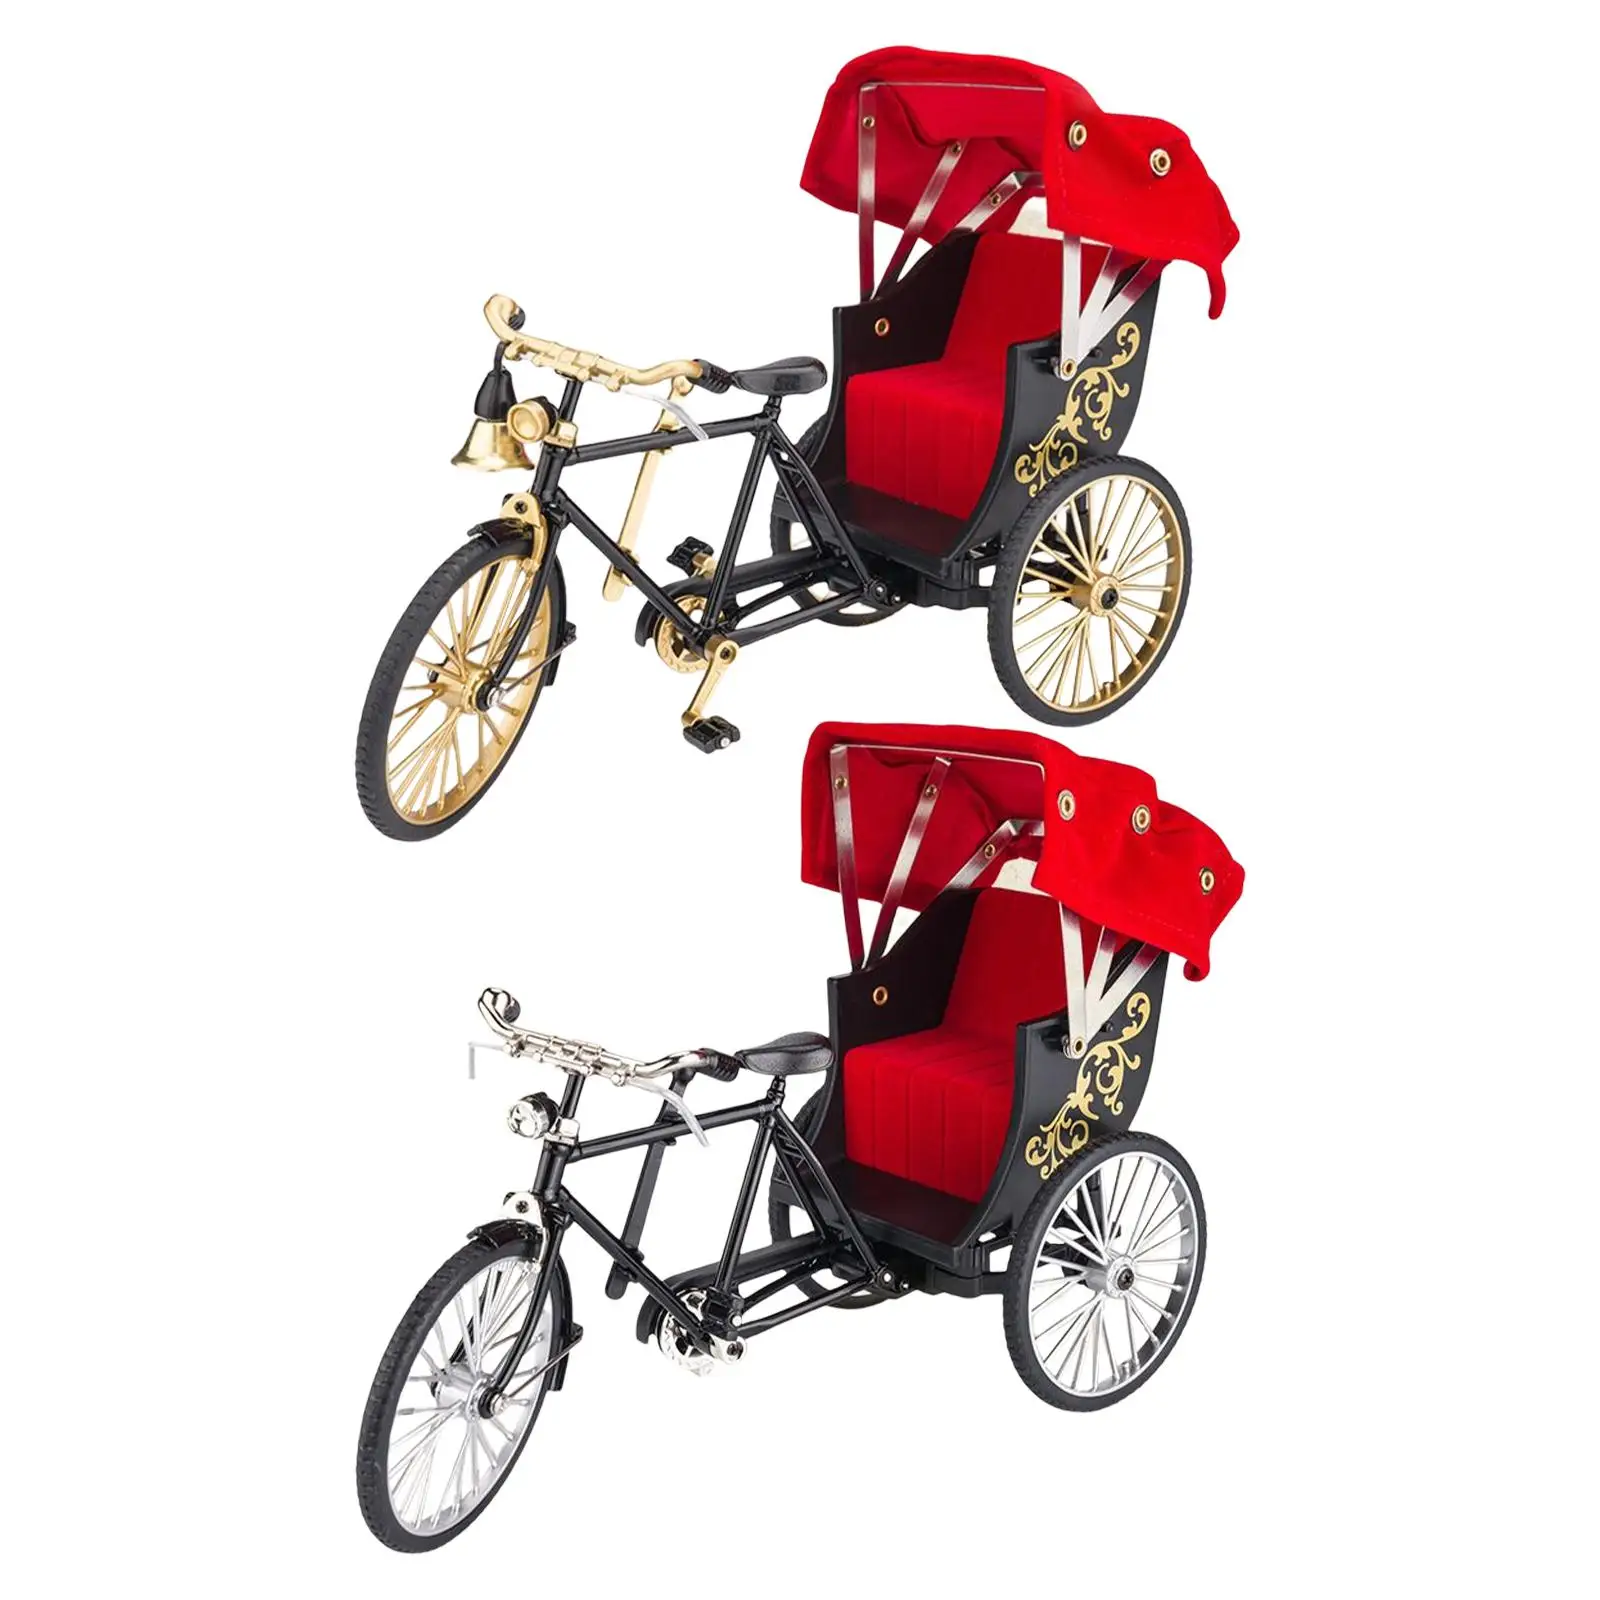 Hong Kong Rickshaw 1:12 Decoration Crafts with Simulation Awning Alloy Die Cast Collection Adult